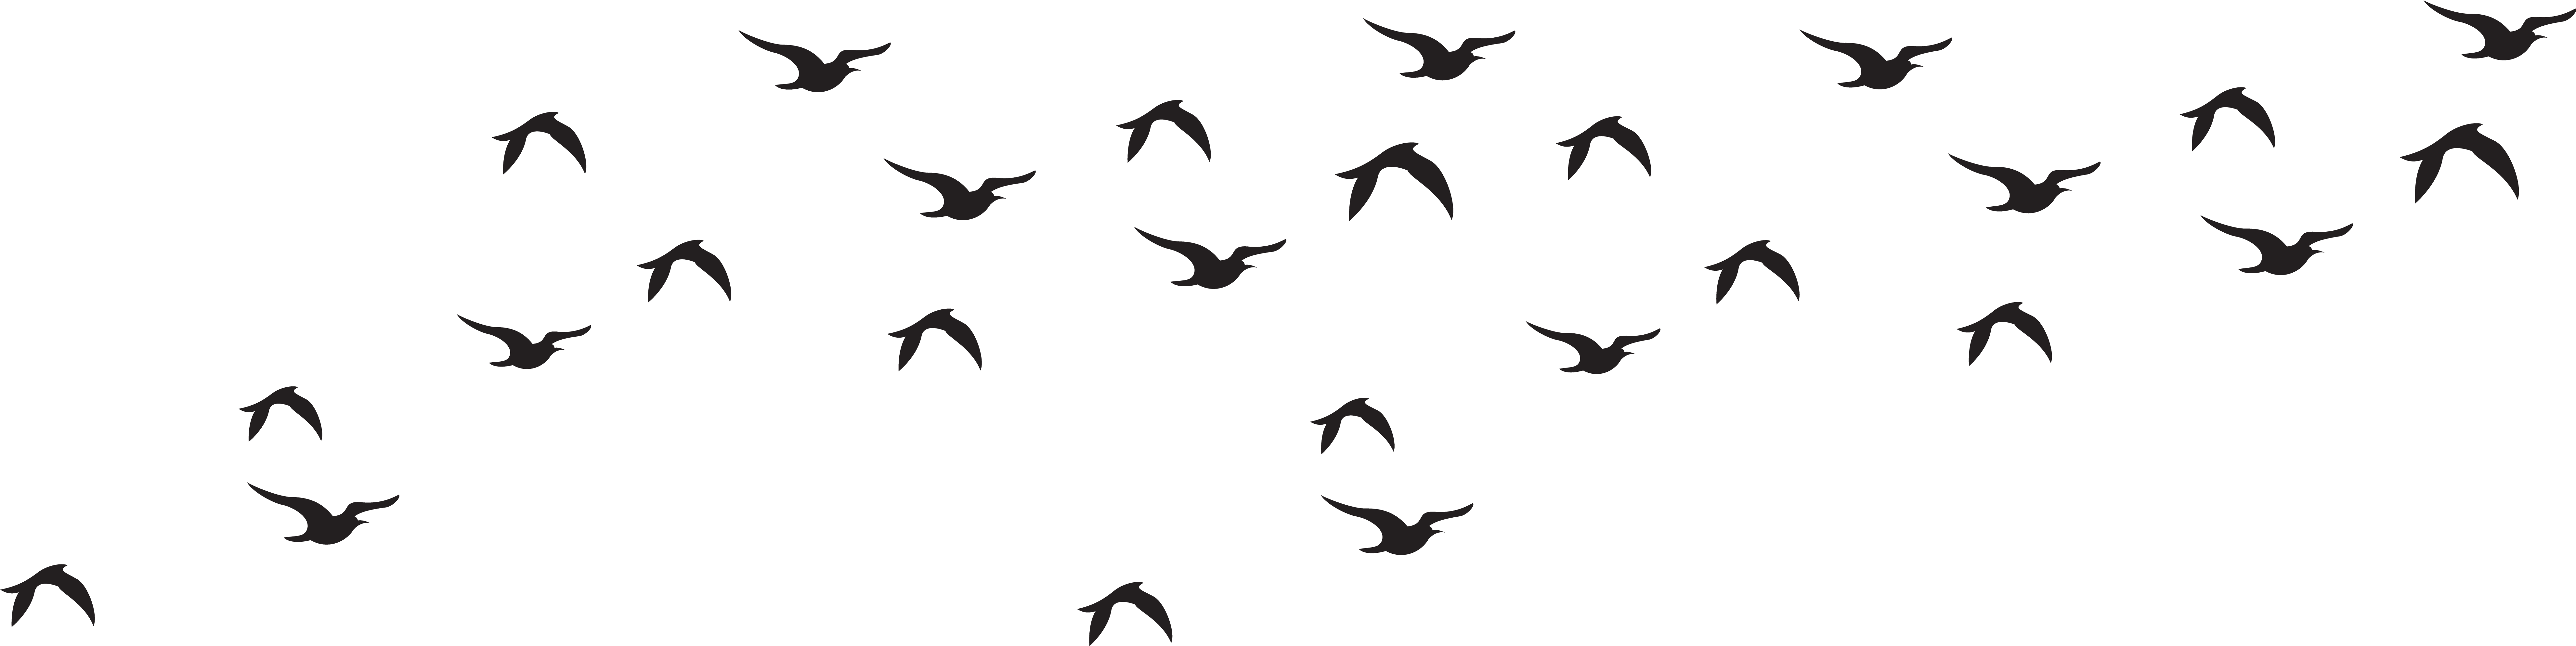 Wildlife Clipart Bird Flock Pencil And In Color - Birds Black And White Png (8000x2087)